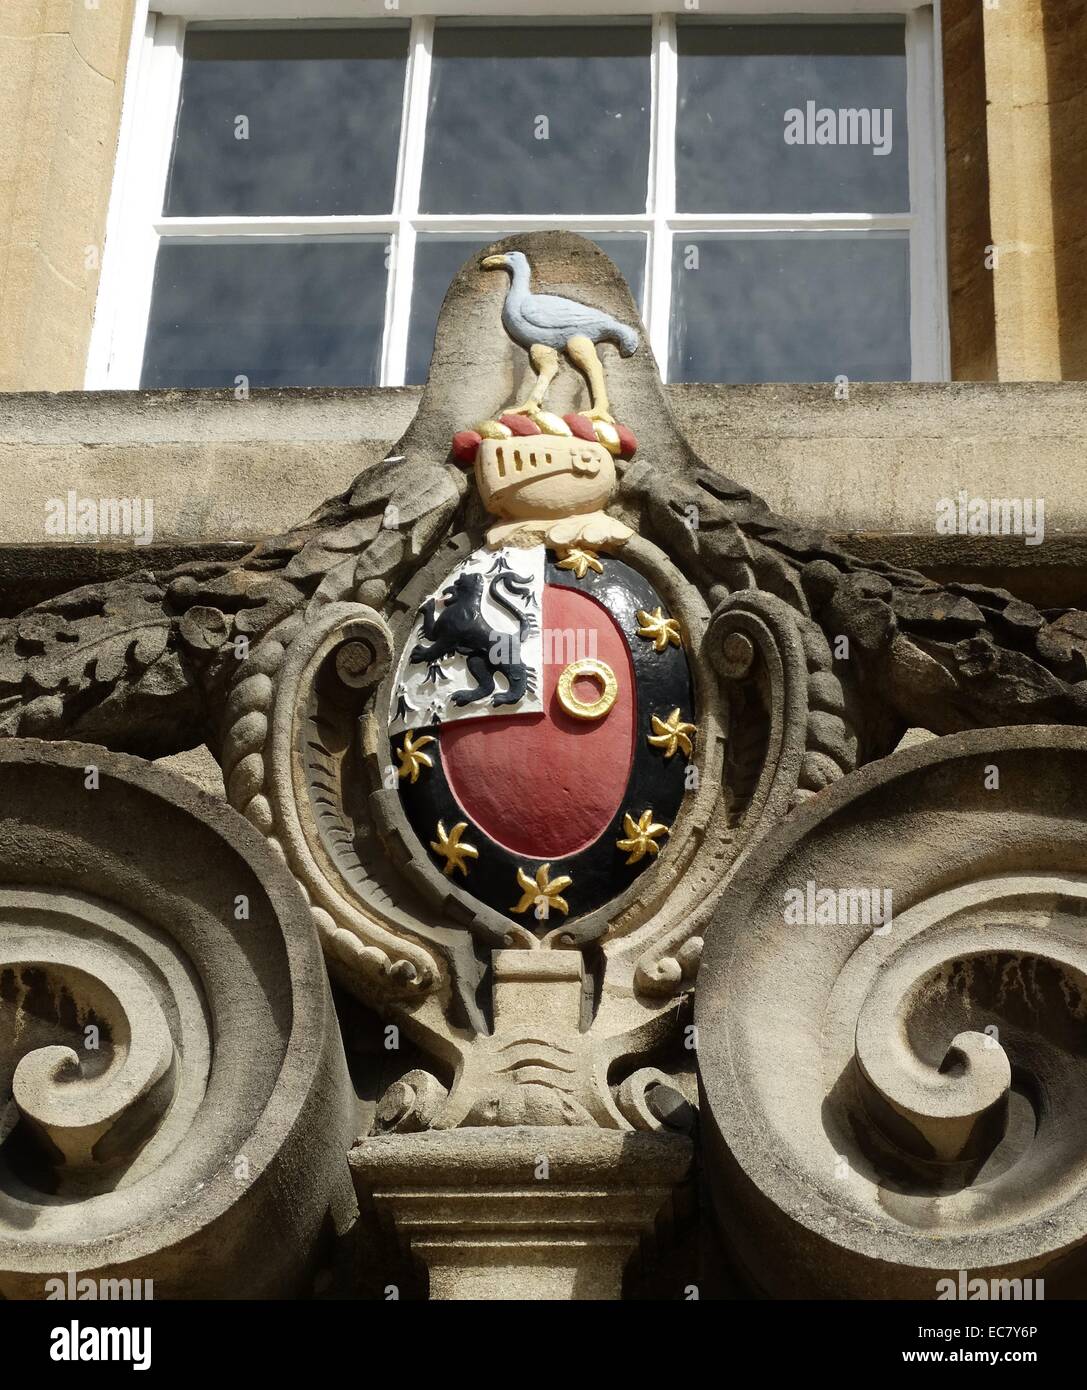 detail showing heraldic badges within St John's College at the University of Oxford; Oxford; England. Founded in 1555 by the merchant Sir Thomas White, intended to provide a source of educated Roman Catholic clerics to support the Counter-Reformation under Queen Mary. Stock Photo